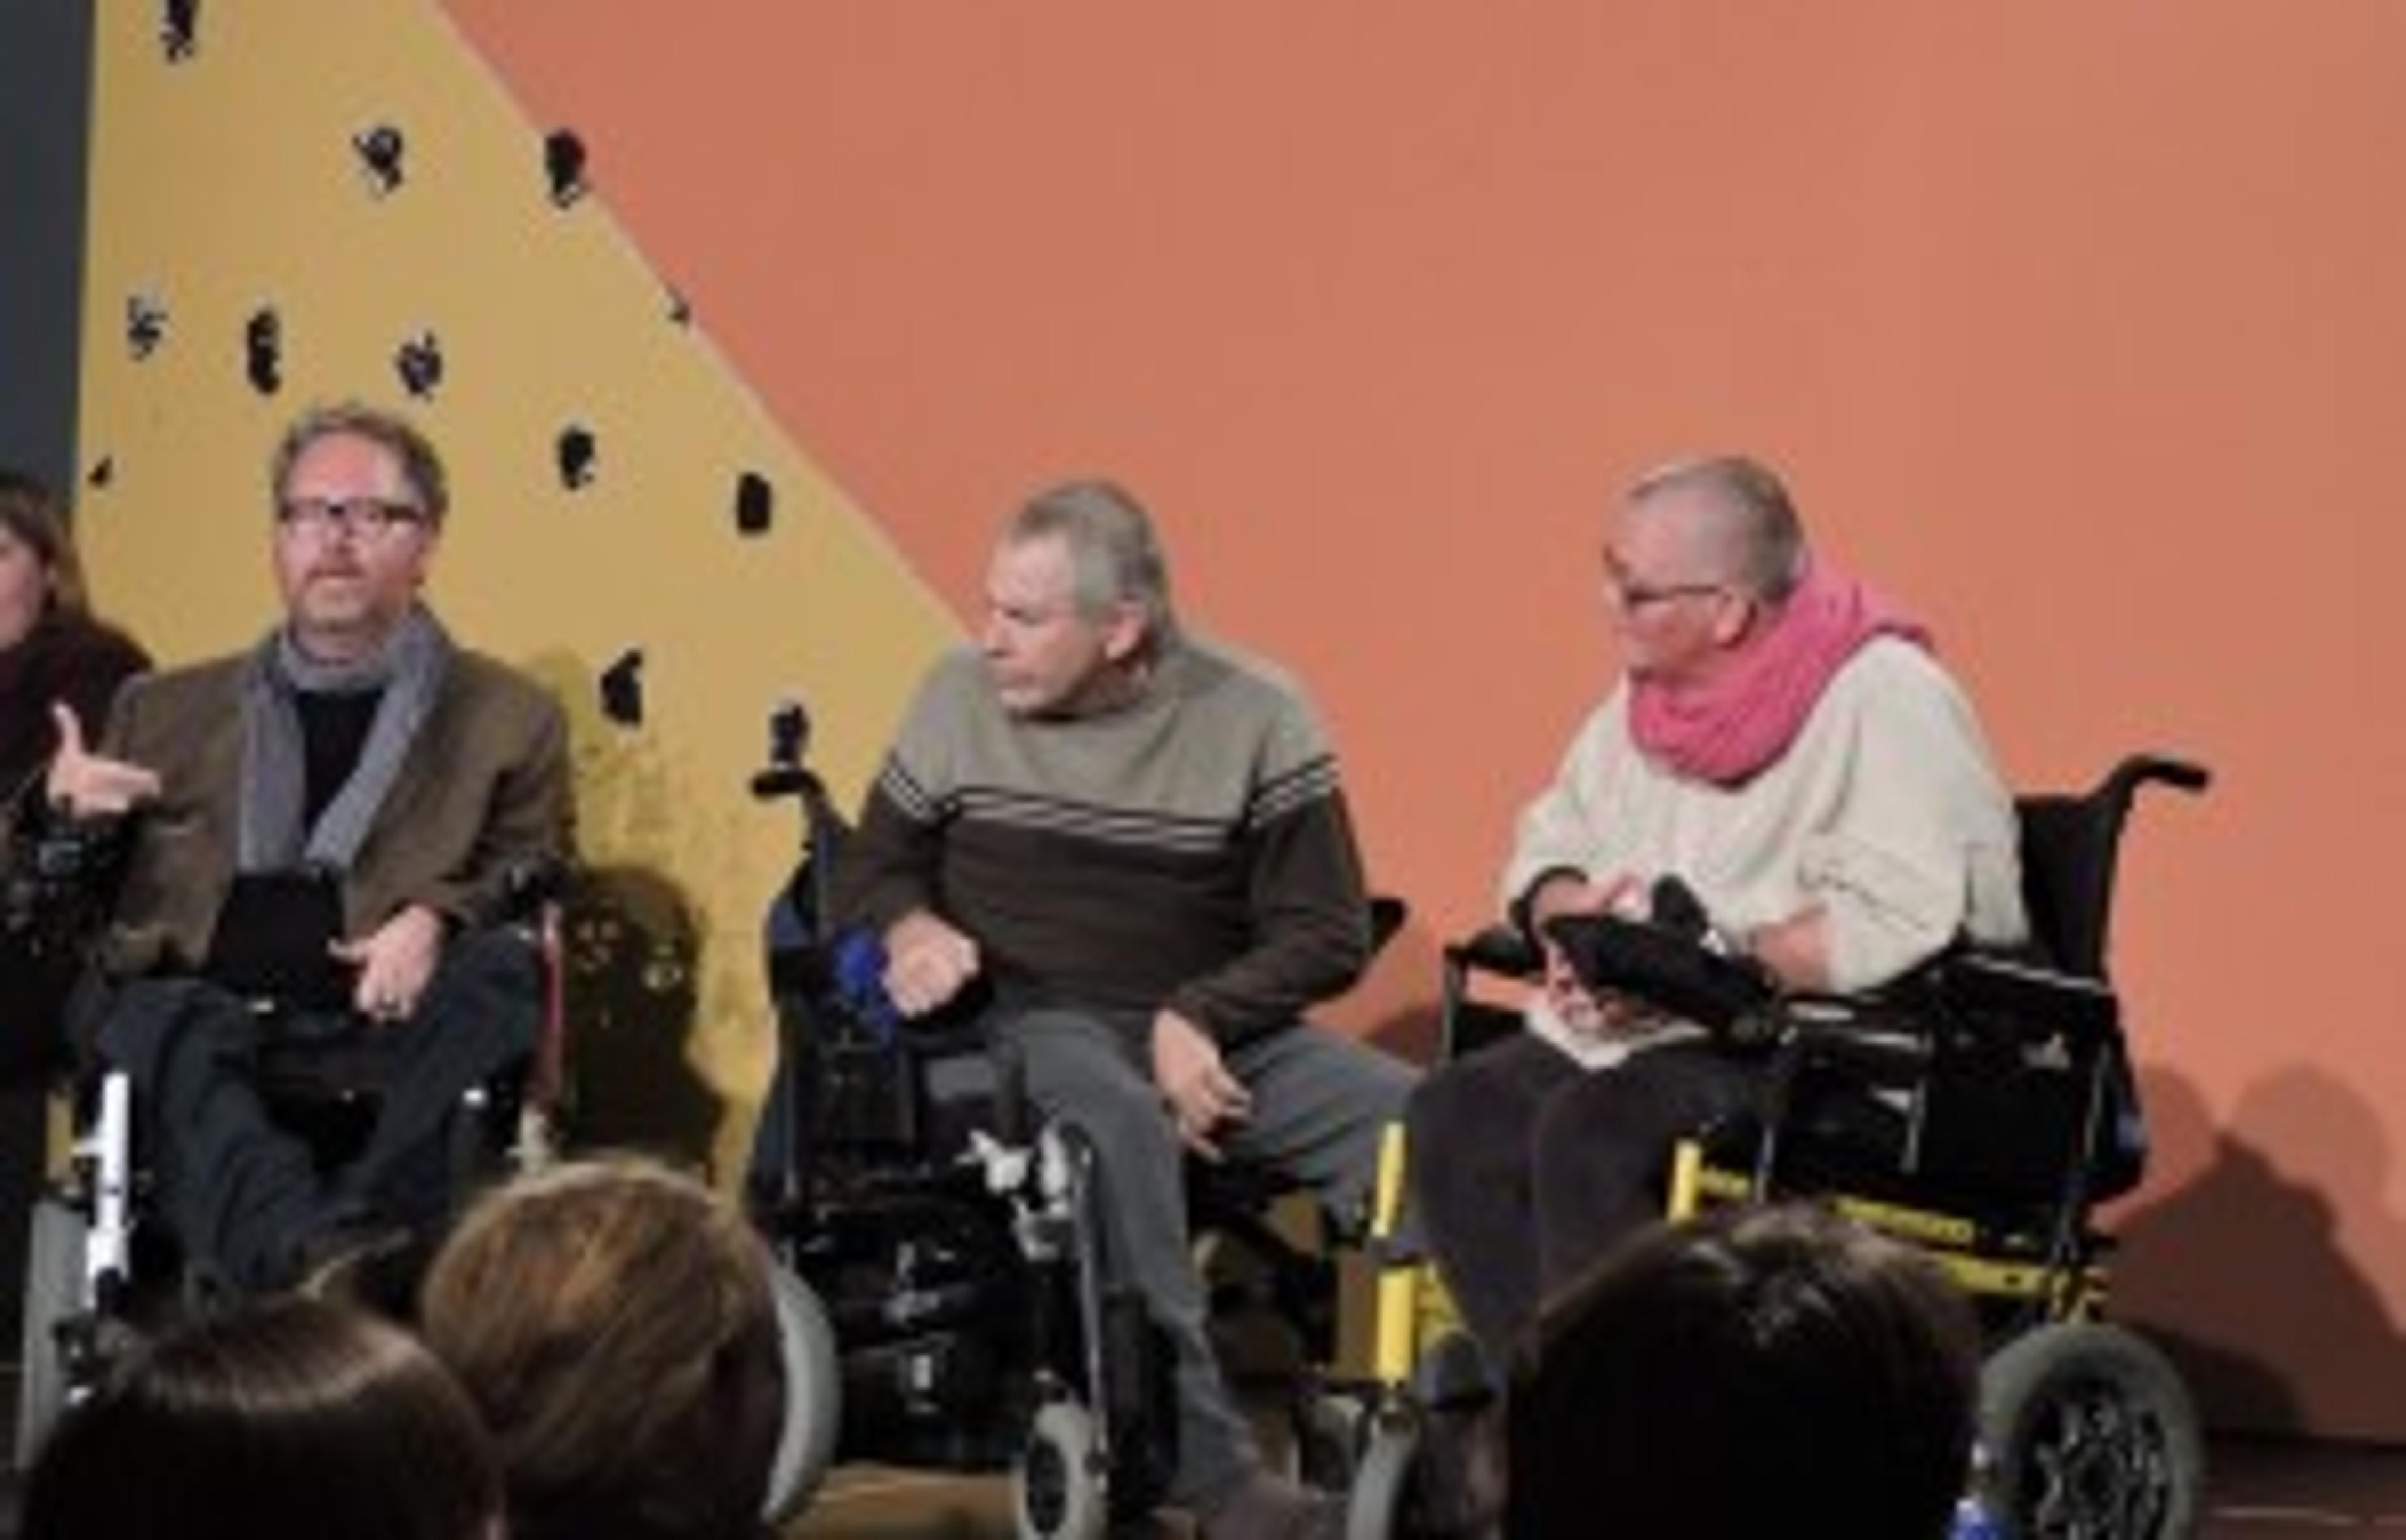 Panelists Christopher Smit, Neil Marcus, and Petra Kuppers discuss representations of disability in the artwork found at ArtPrize 2014. 